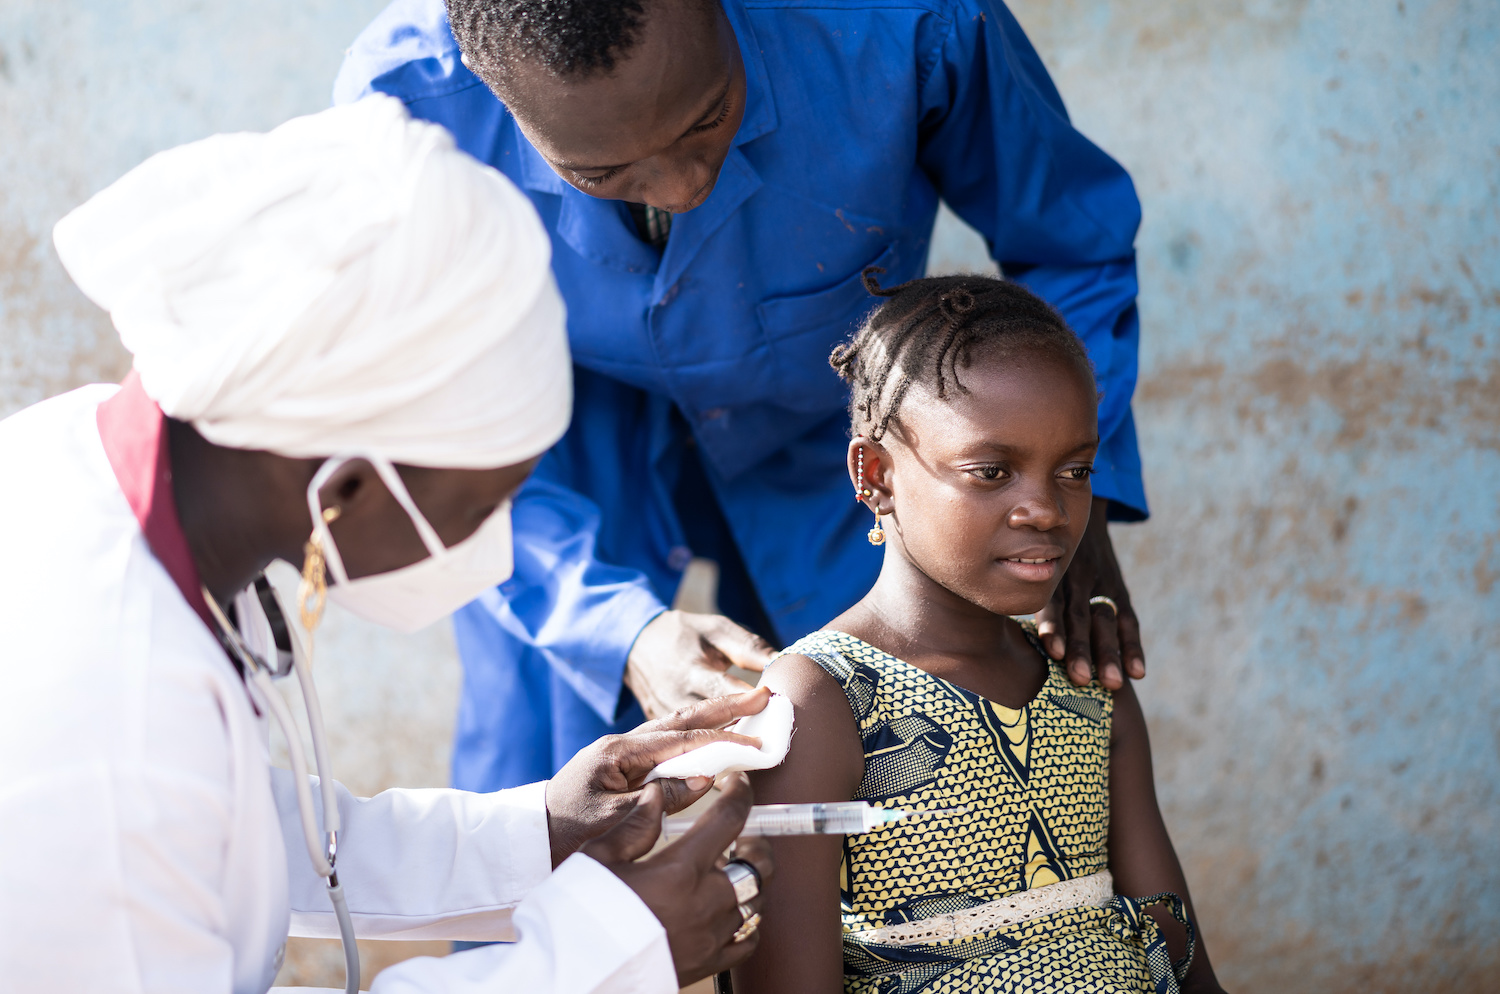 In this image, a relieved little African girl is looked after by the vaccination staff after she has received her first Covid shot. Source: Riccardo Mayer